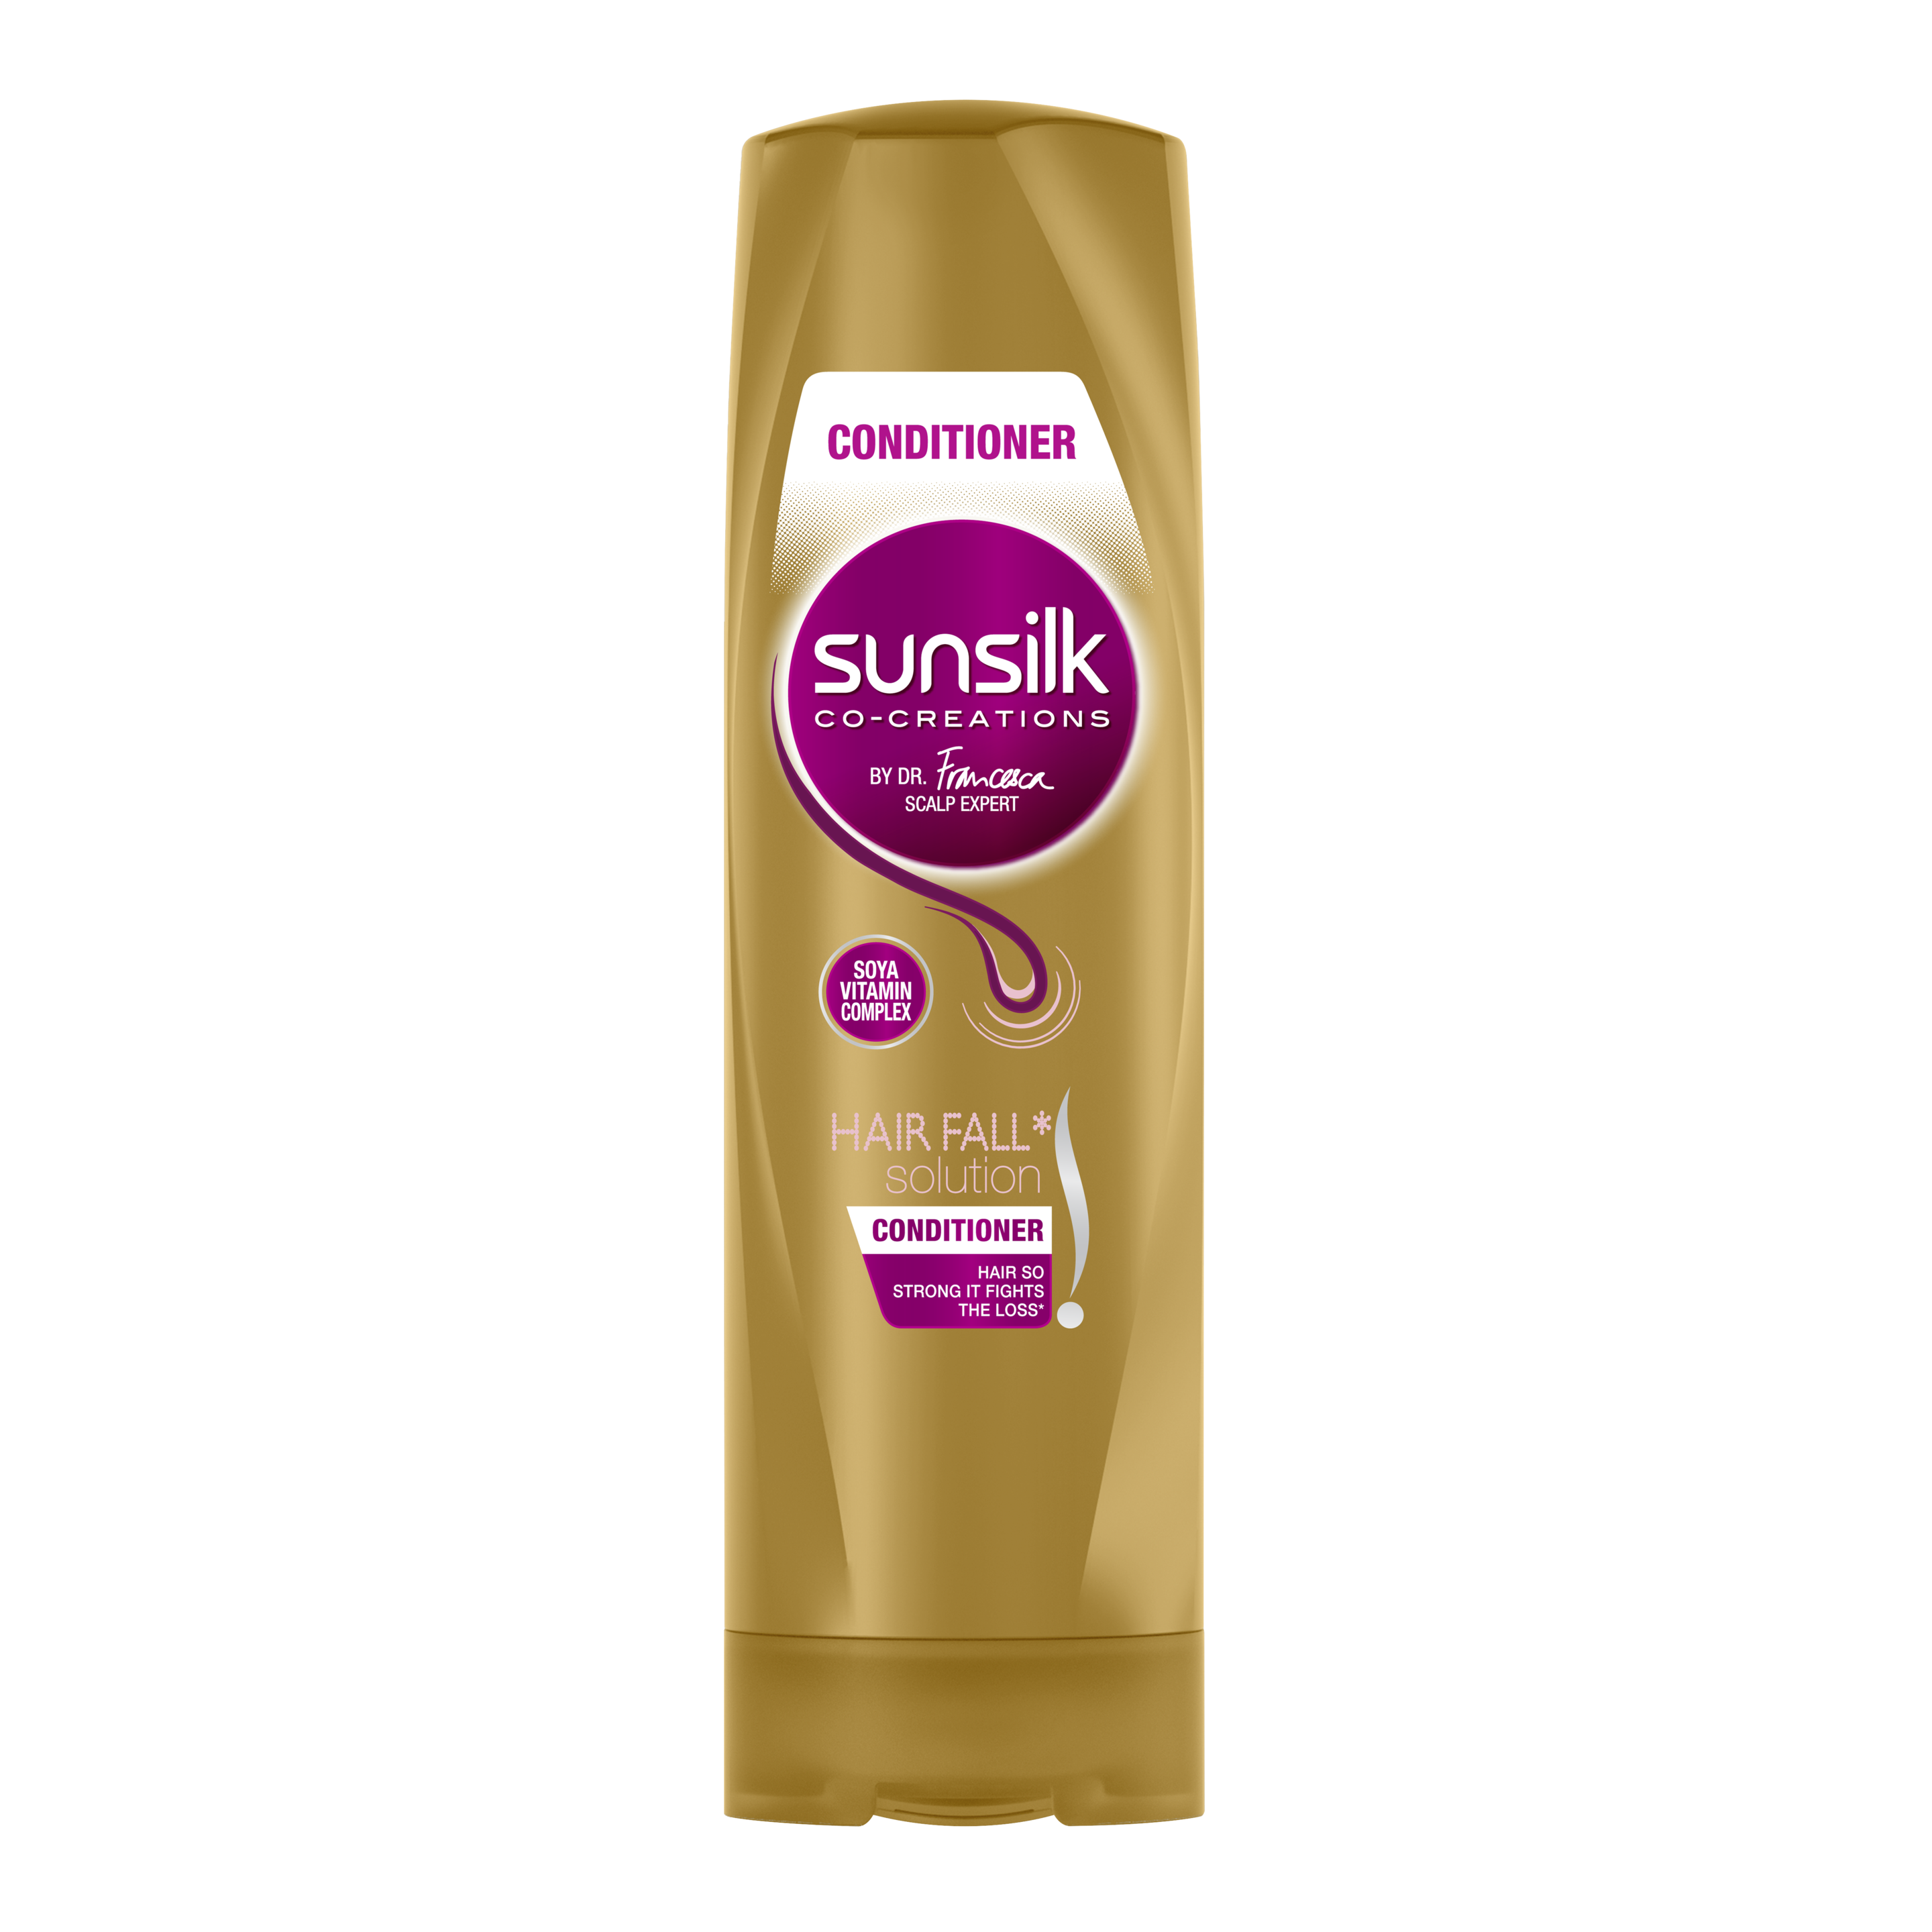 Sunsilk Hair Fall Solution Conditioner 320ml front of pack image